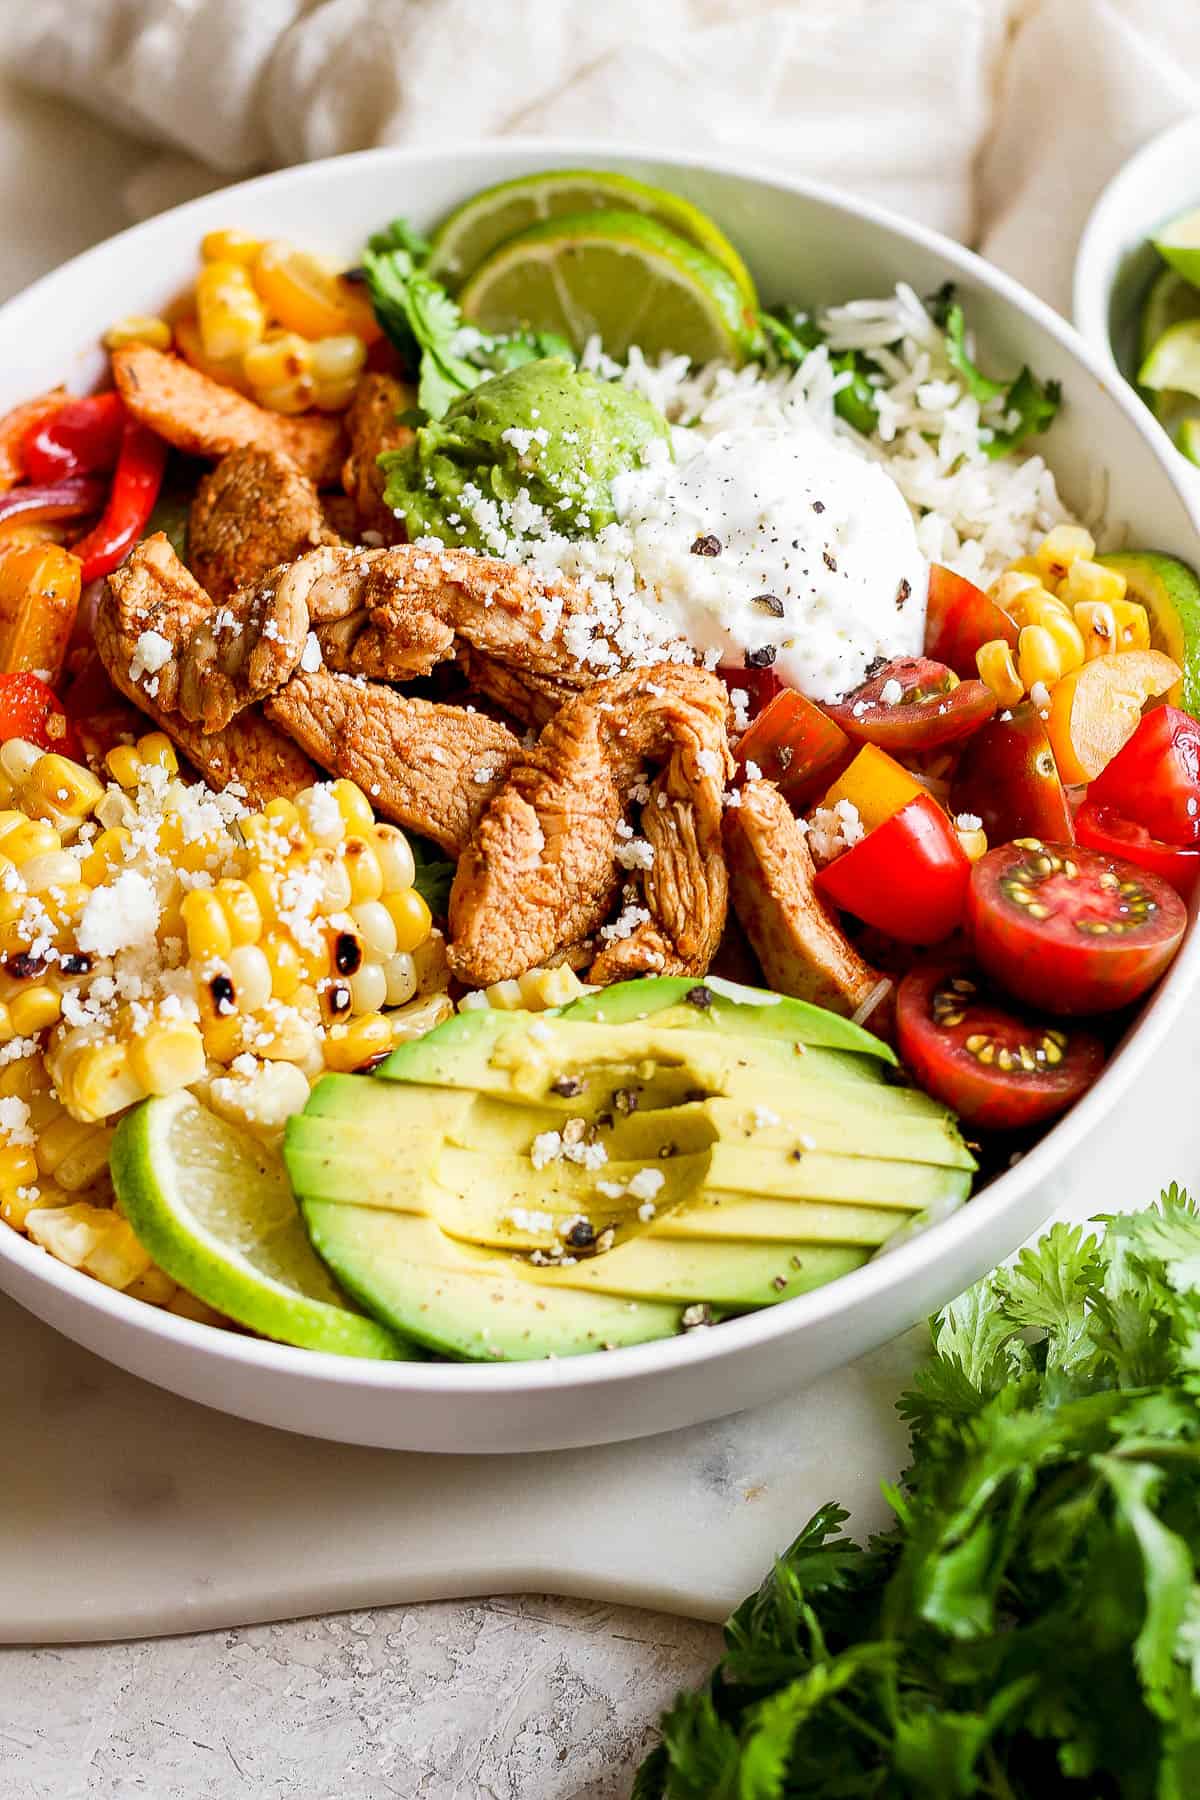 A close-up shot of all the fresh ingredients added on top of the chicken fajita bowl.